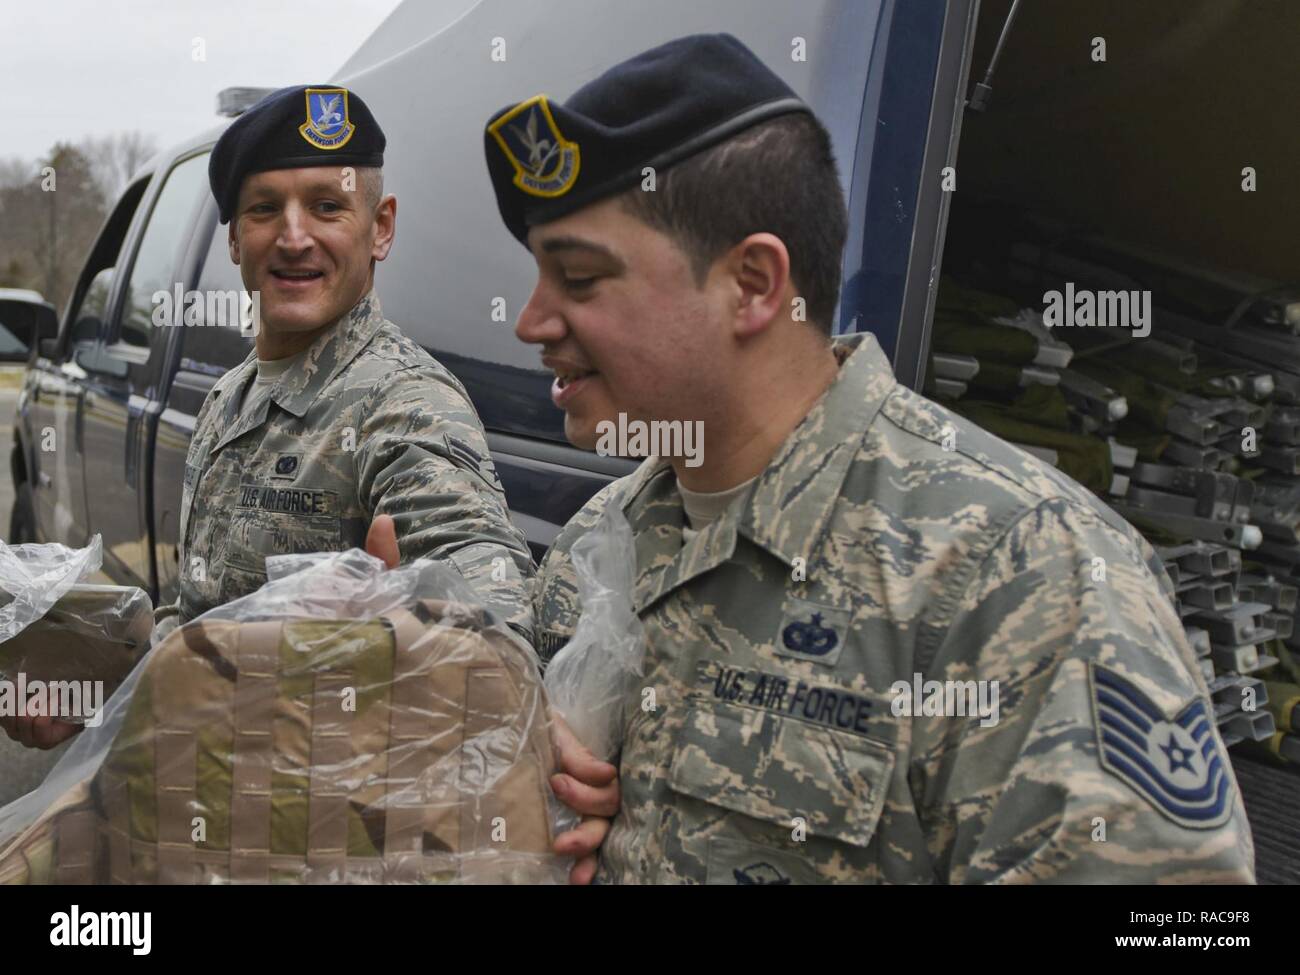 Airman First Class Travis Roemmele, passes equipment to Technical Sergeant Joshua Ramirez, 108th Security Forces Members bucket line style out of a storage unit at the 108th Wing, Joint Base McGuire-Dix-Lakehurst, N.J., Jan. 17, 2017. The 108th Security Forces are preparing to support Local Emergency Services in Washington D. C. during the 58th Presidential Inauguration. Stock Photo